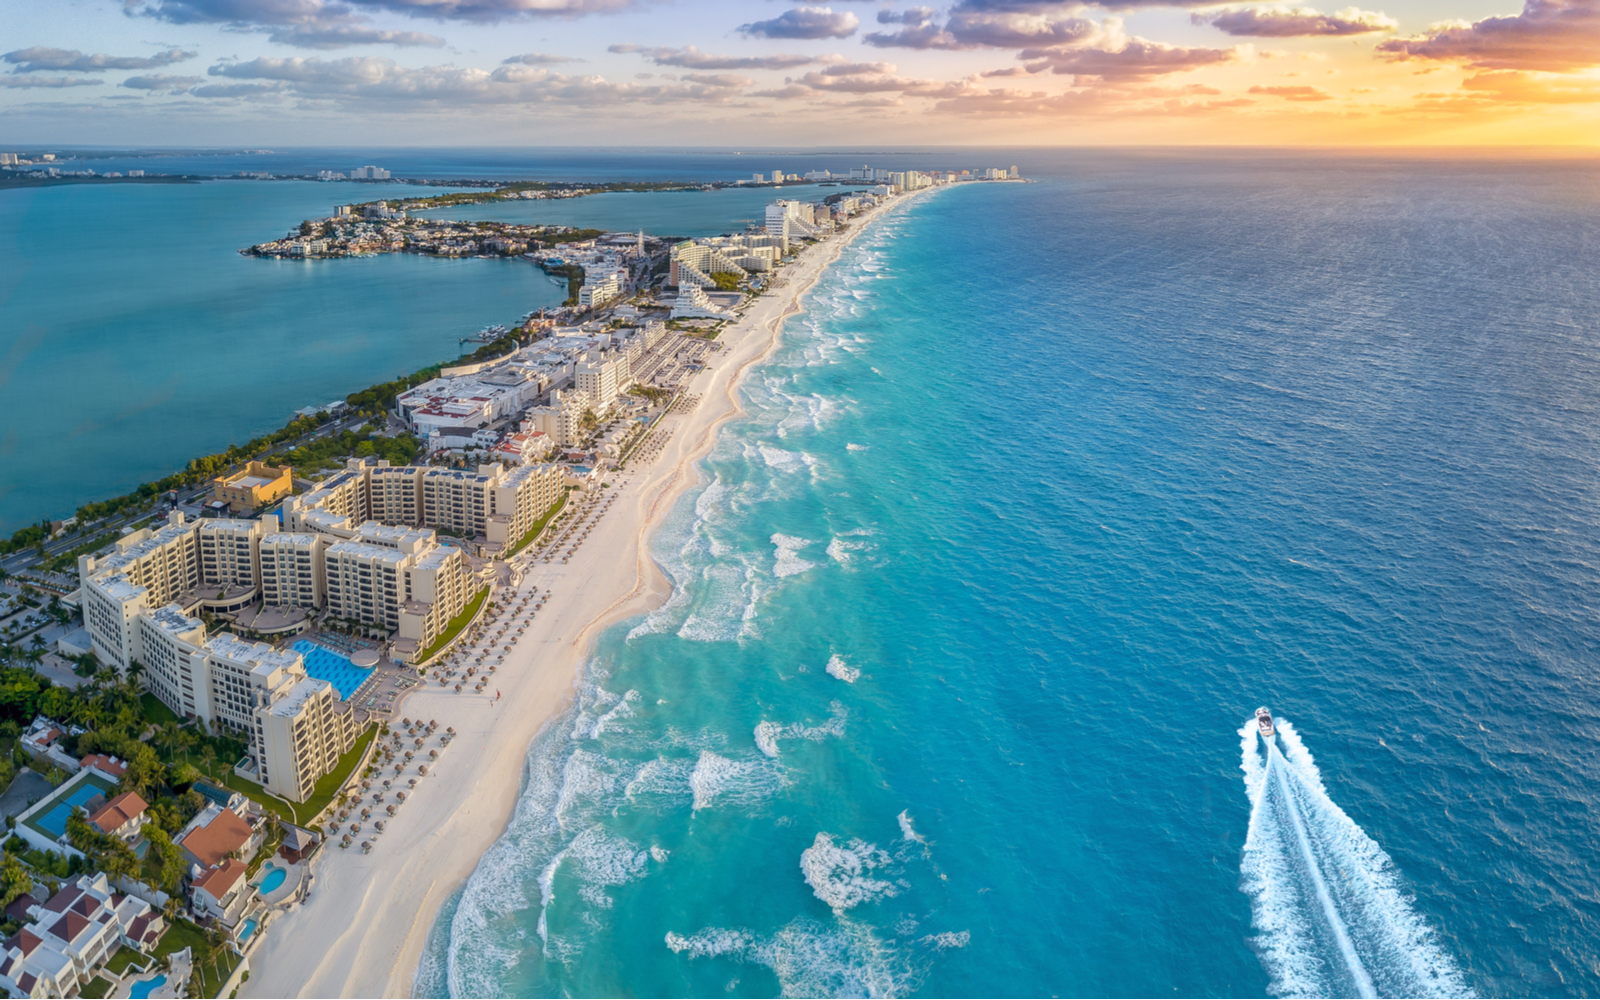 Aerial image of the Cancun beach for a piece on things to do in Cancun